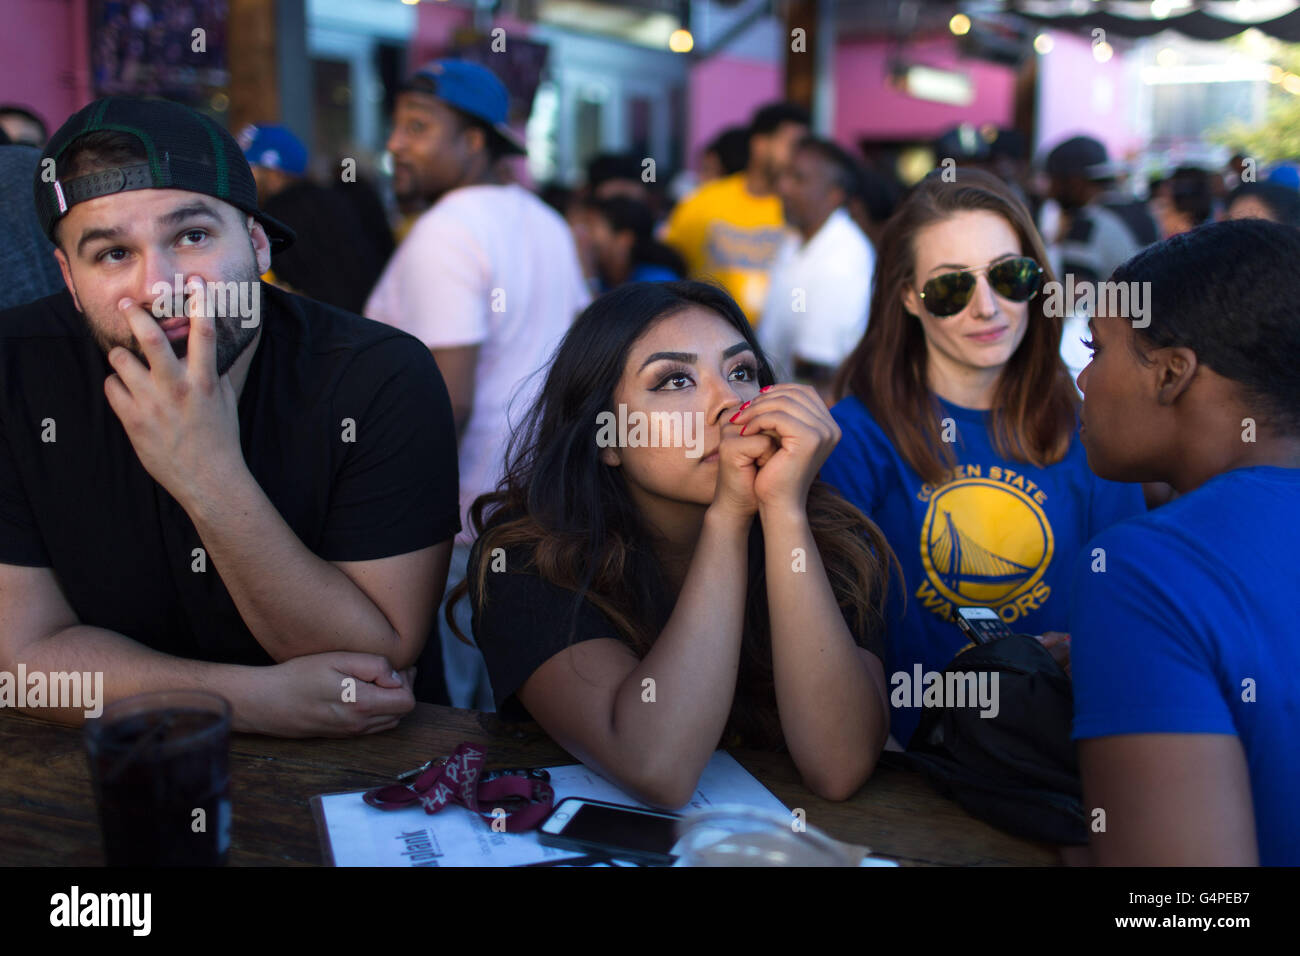 Oakland, California, USA. 19th June, 2016. Warriors fans react to a close loss to the Cavaliers in the NBA Finals Championship game. Credit:  John Orvis/Alamy Live News Stock Photo